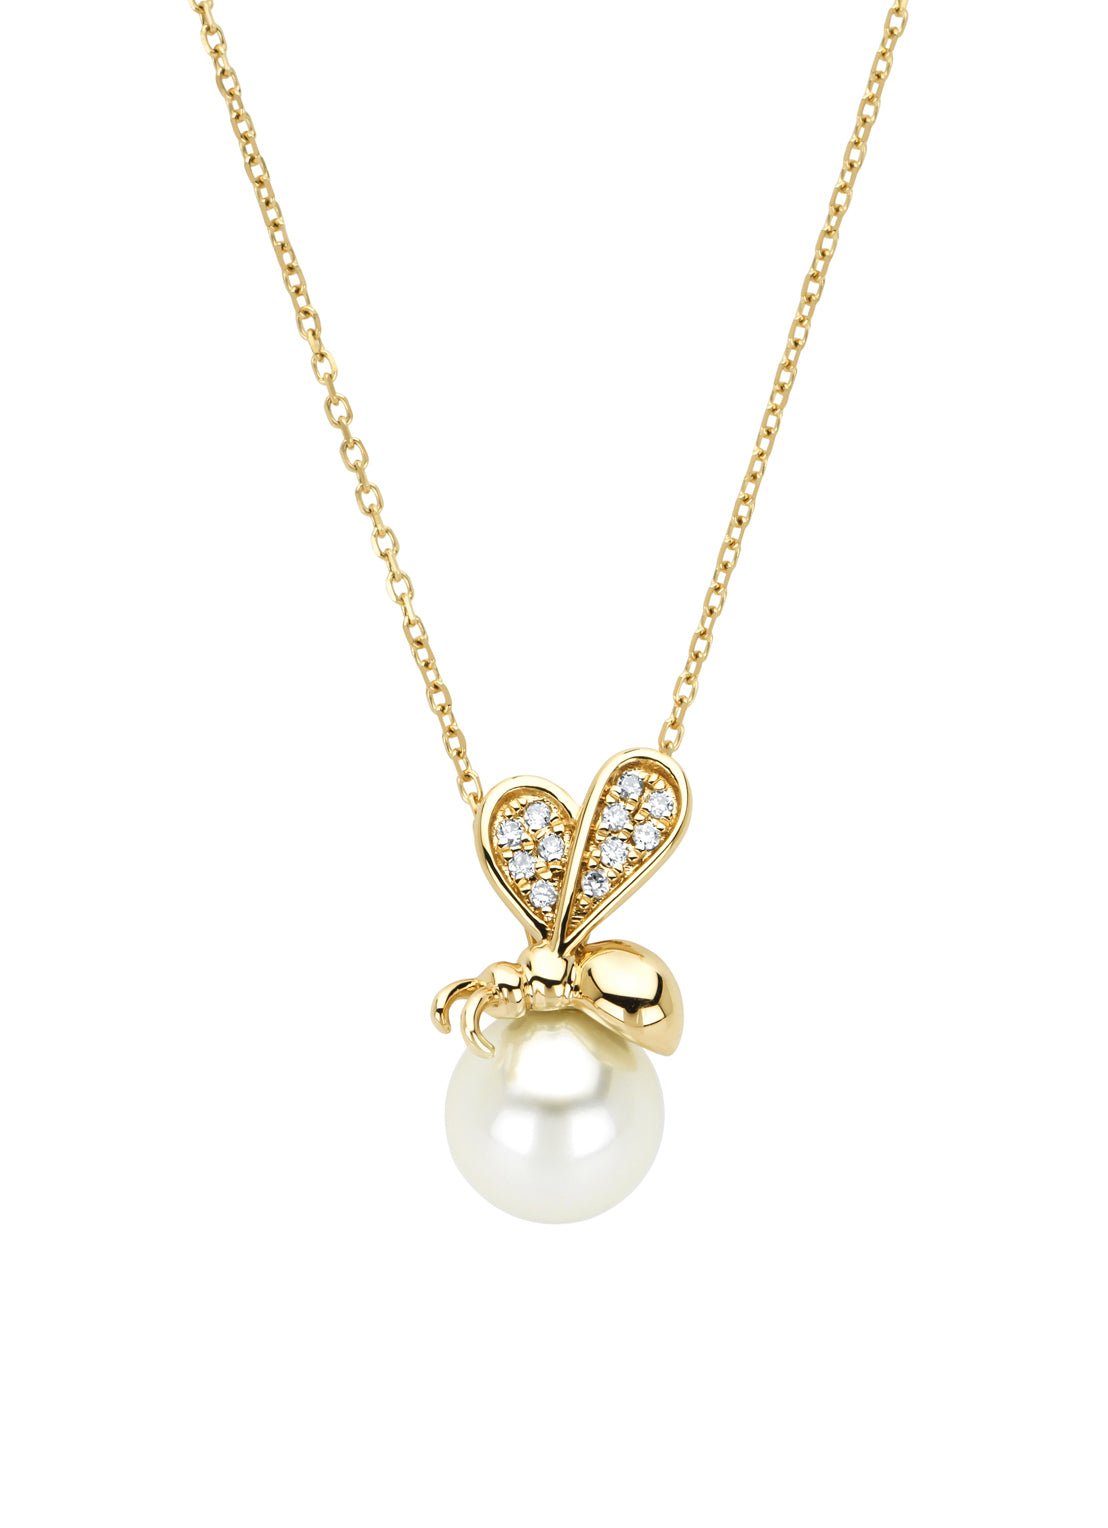 Yellow gold pendant with necklace, 2.50 ct freshwater pearl, queen bee